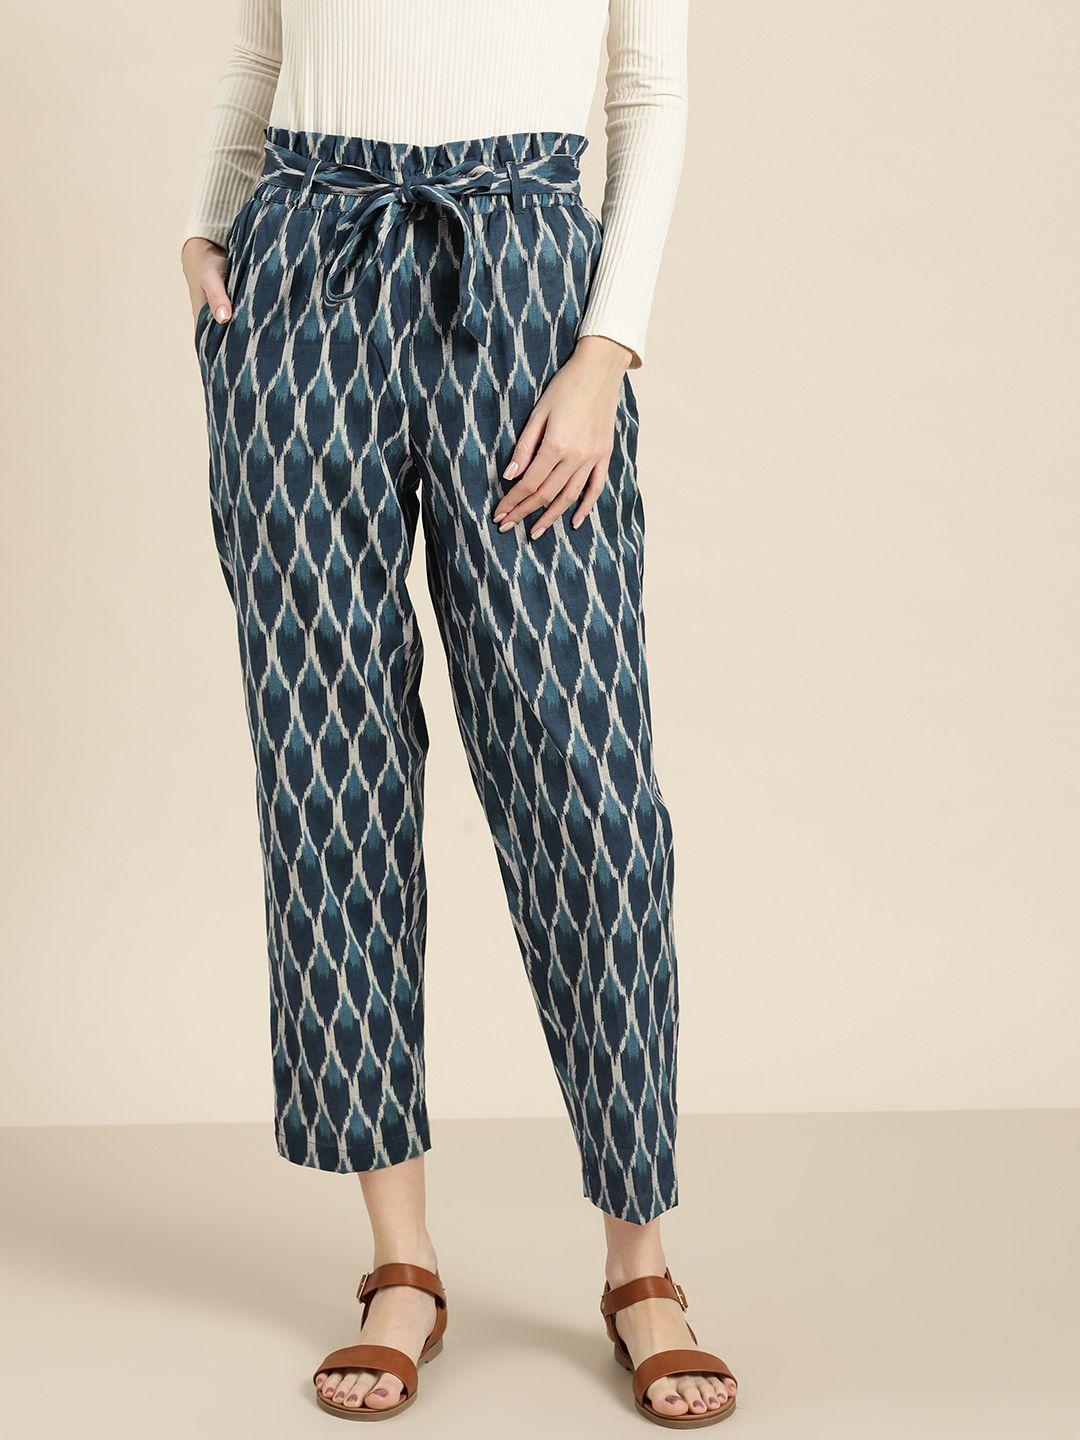 shae-by-sassafras-women-navy-blue-&-off-white-ikat-printed-cropped-trousers